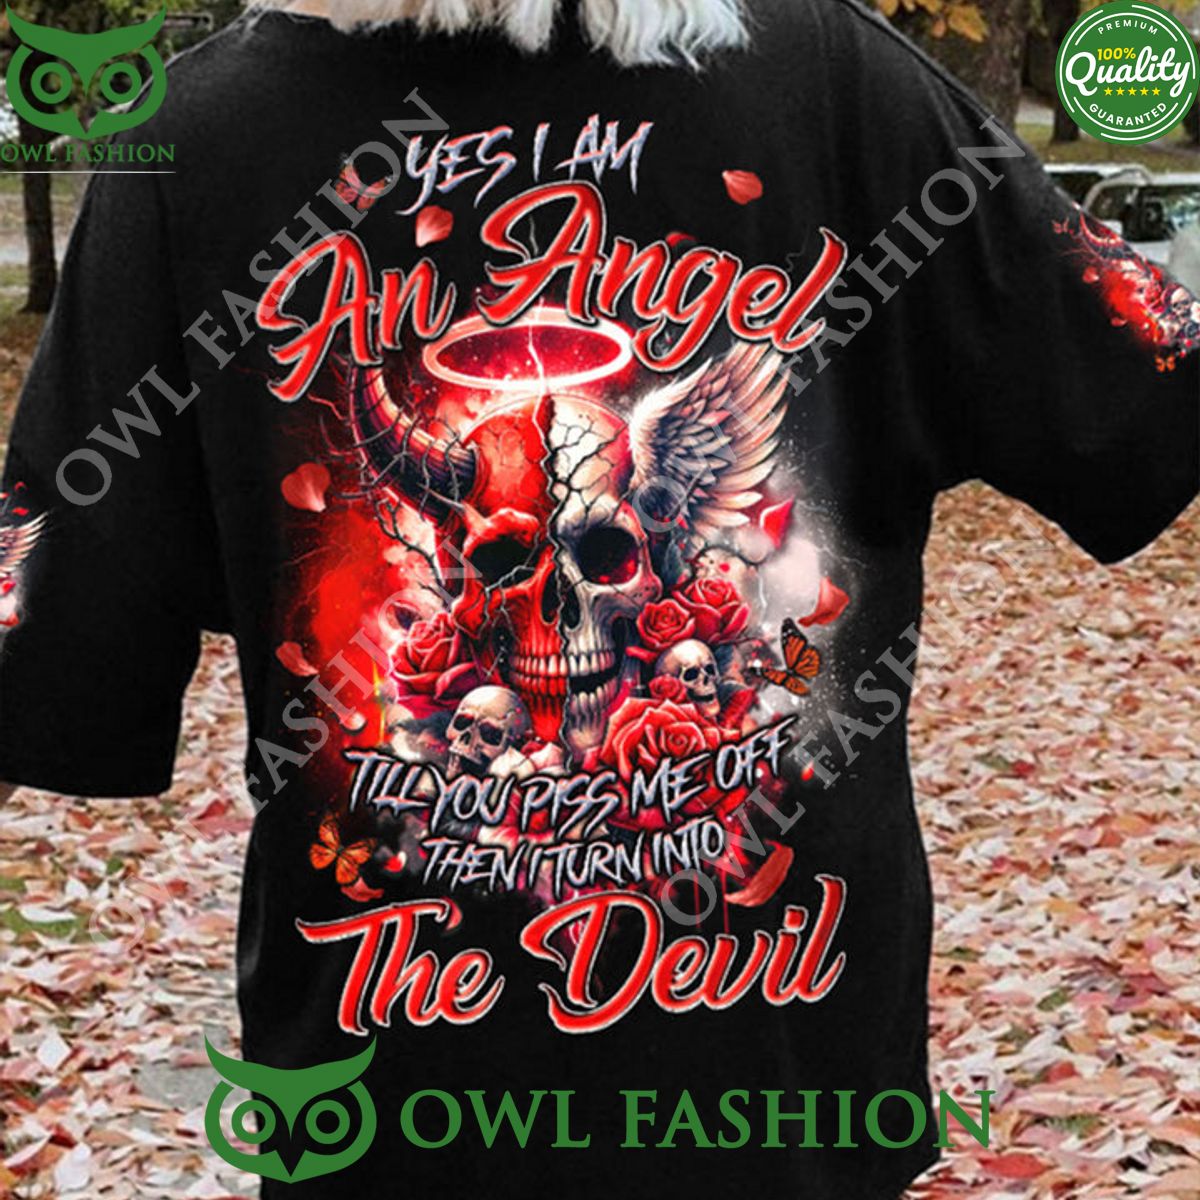 I AM AN ANGEL TILL YOU PISS ME OFF THEN I TURN INTO THE DEVIL T SHIRT